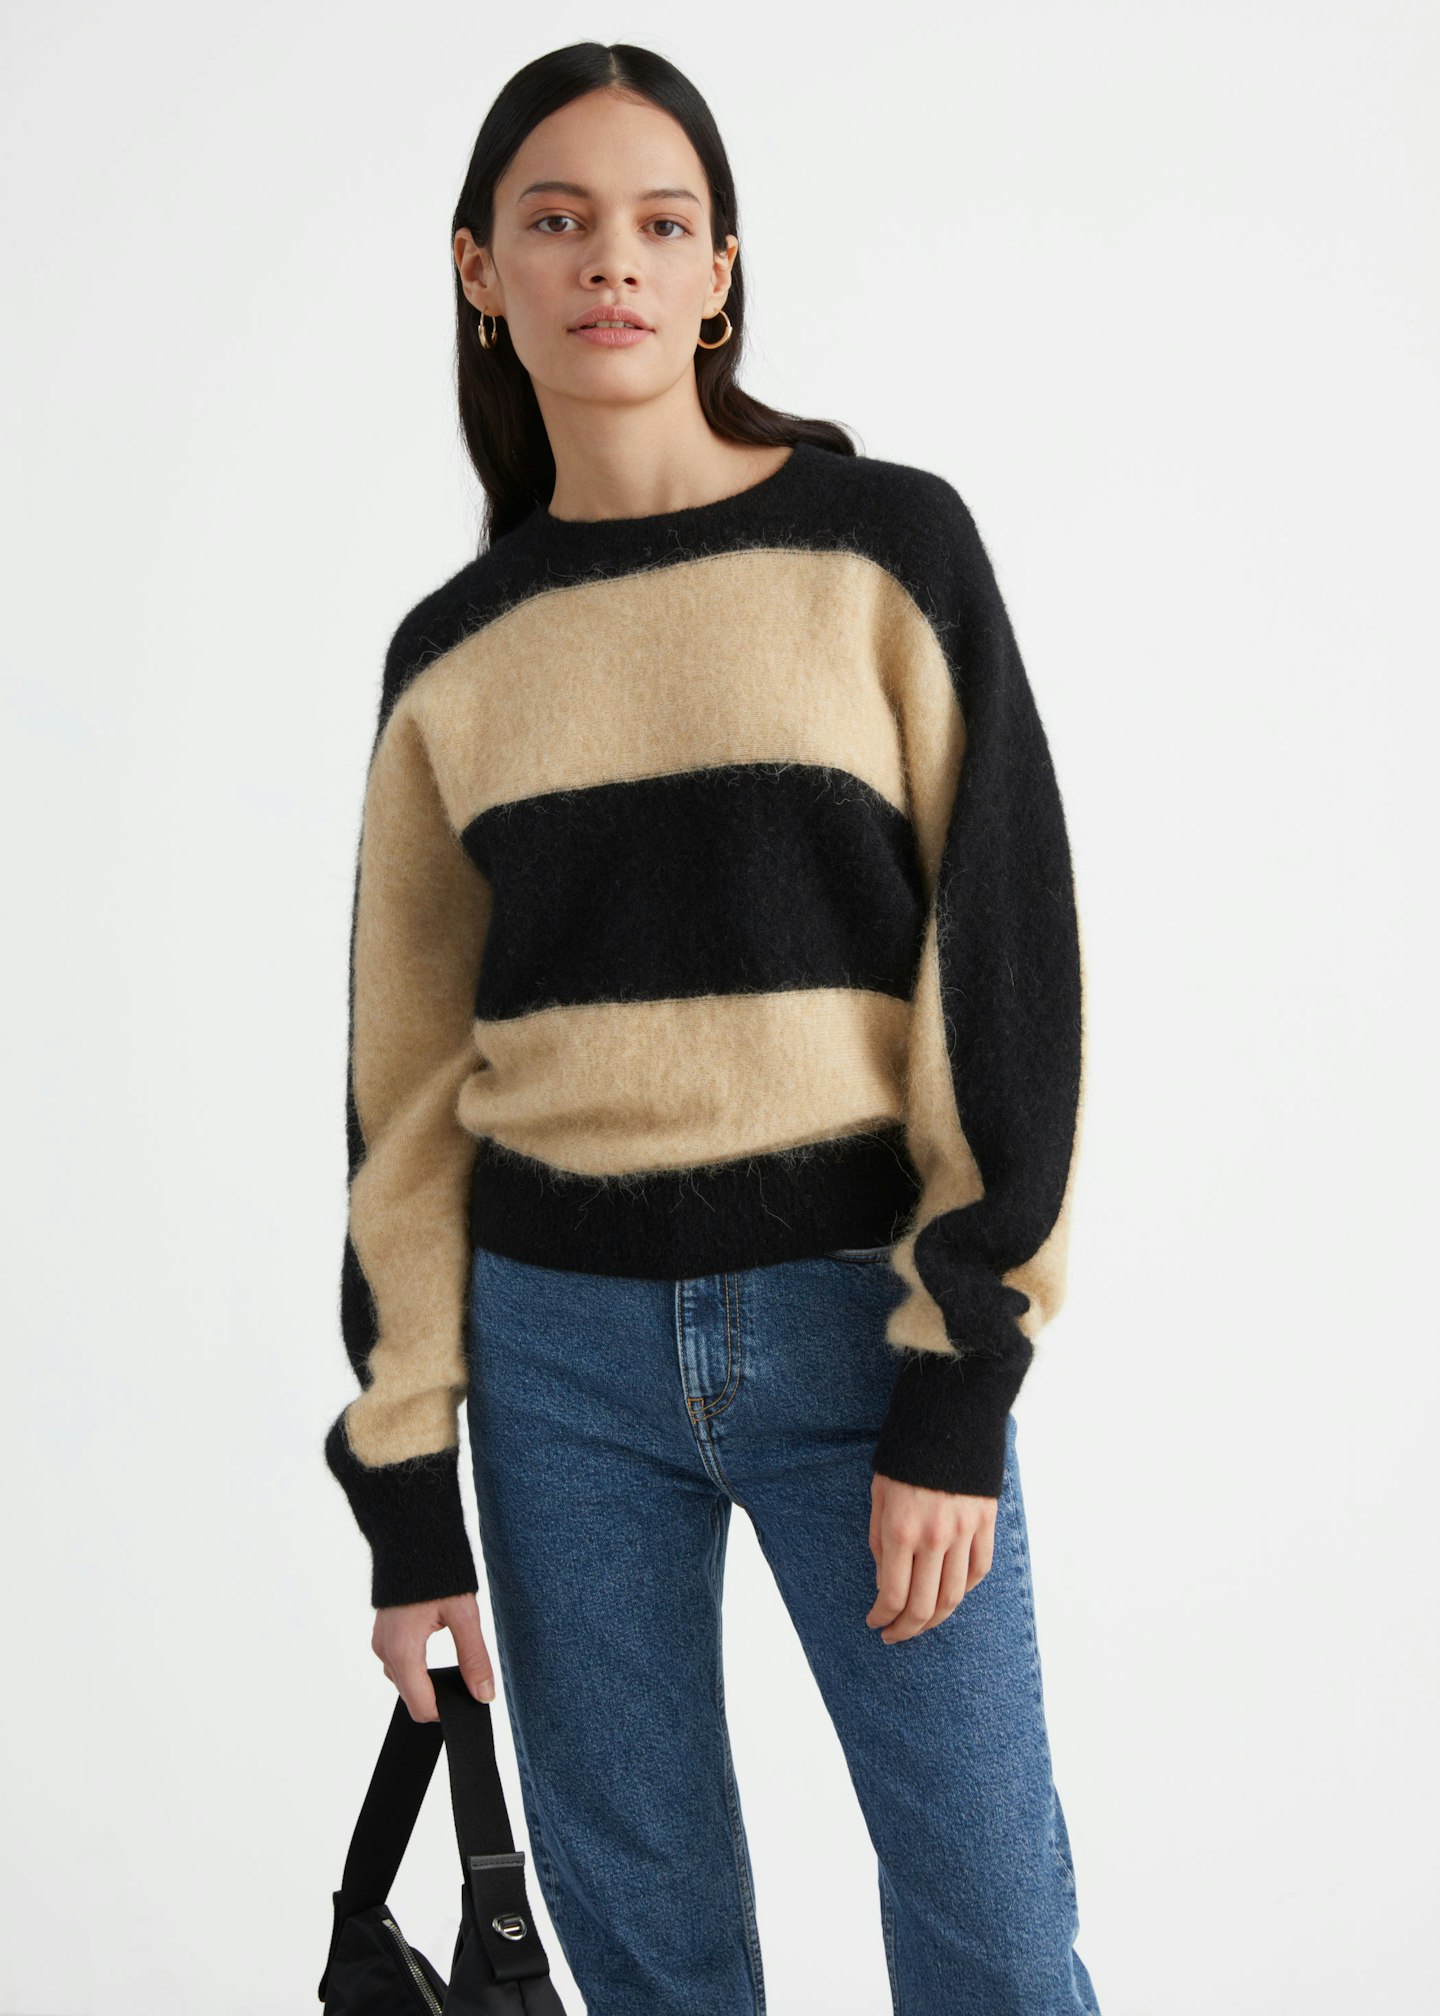 & Other Stories, Oversized Bat Wing Knit Jumper, £75